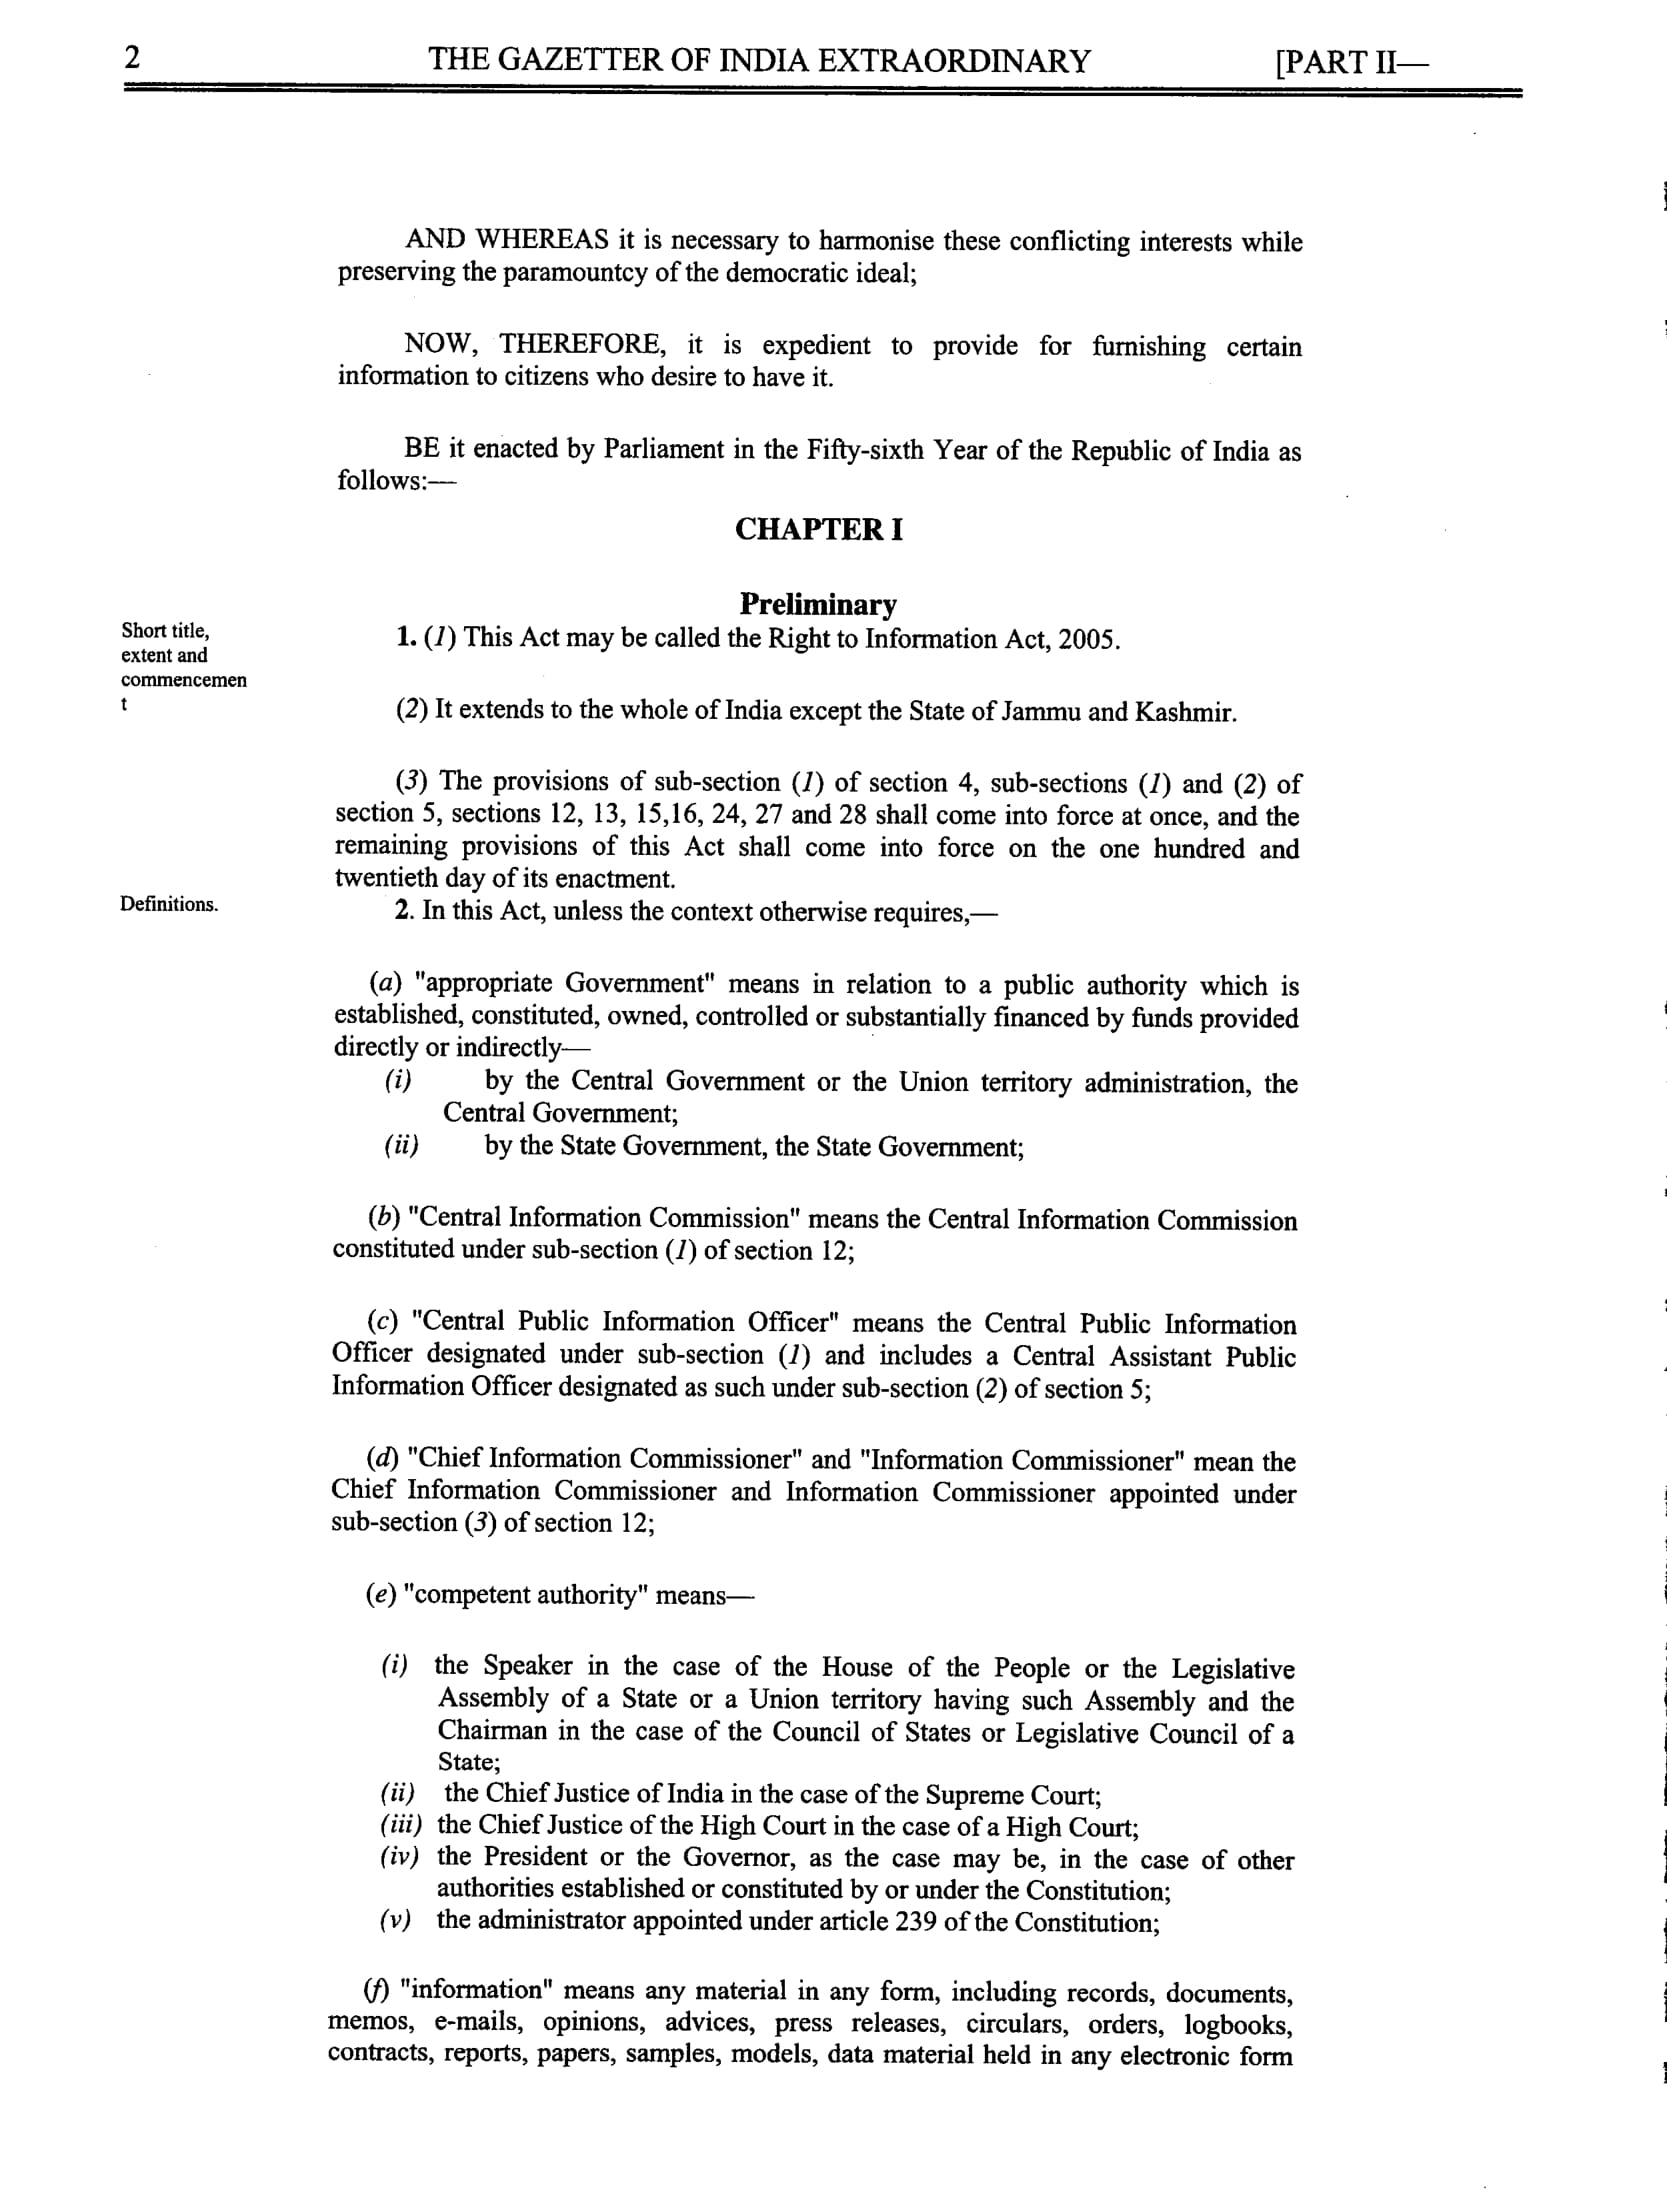 RTI Act 2005 - Right to Information Act PDF-02